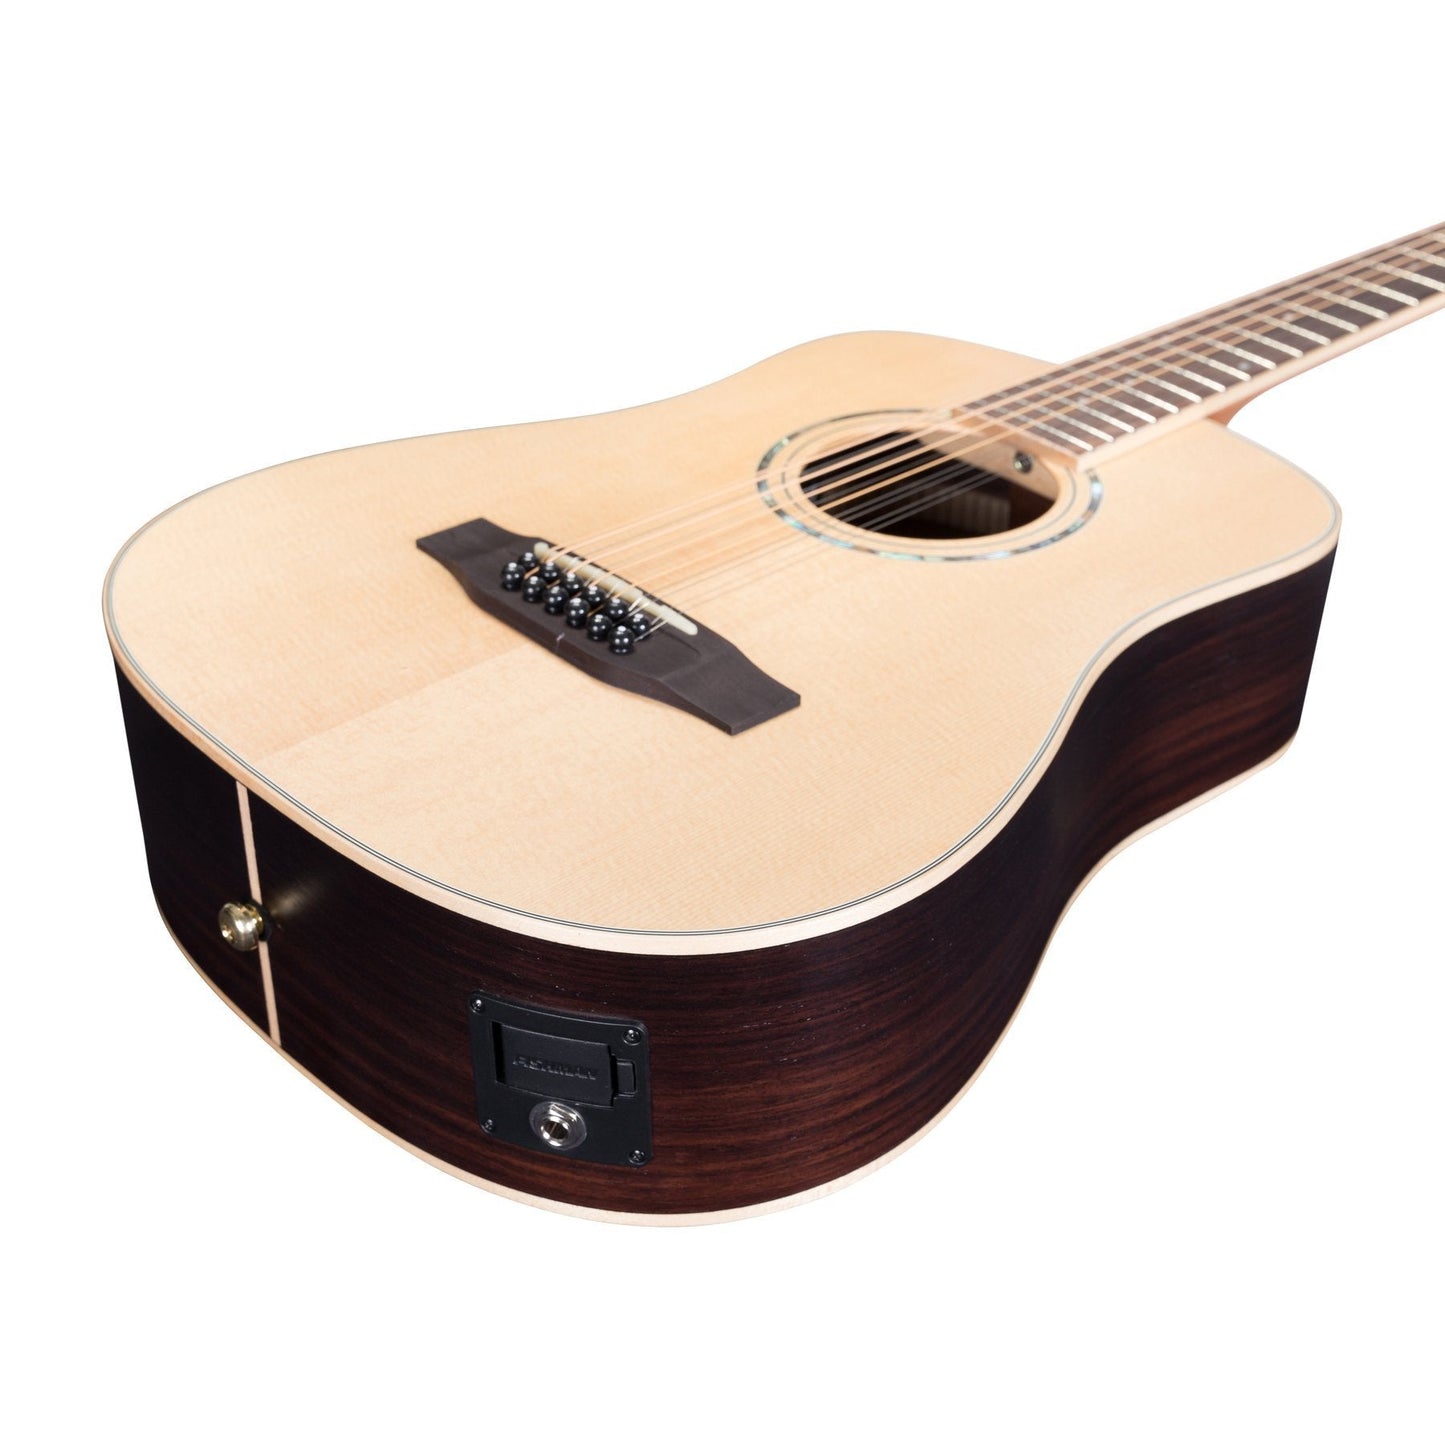 Timberidge '3 Series' 12-String Spruce Solid Top Acoustic-Electric Traveller Mini Guitar (Natural Satin)